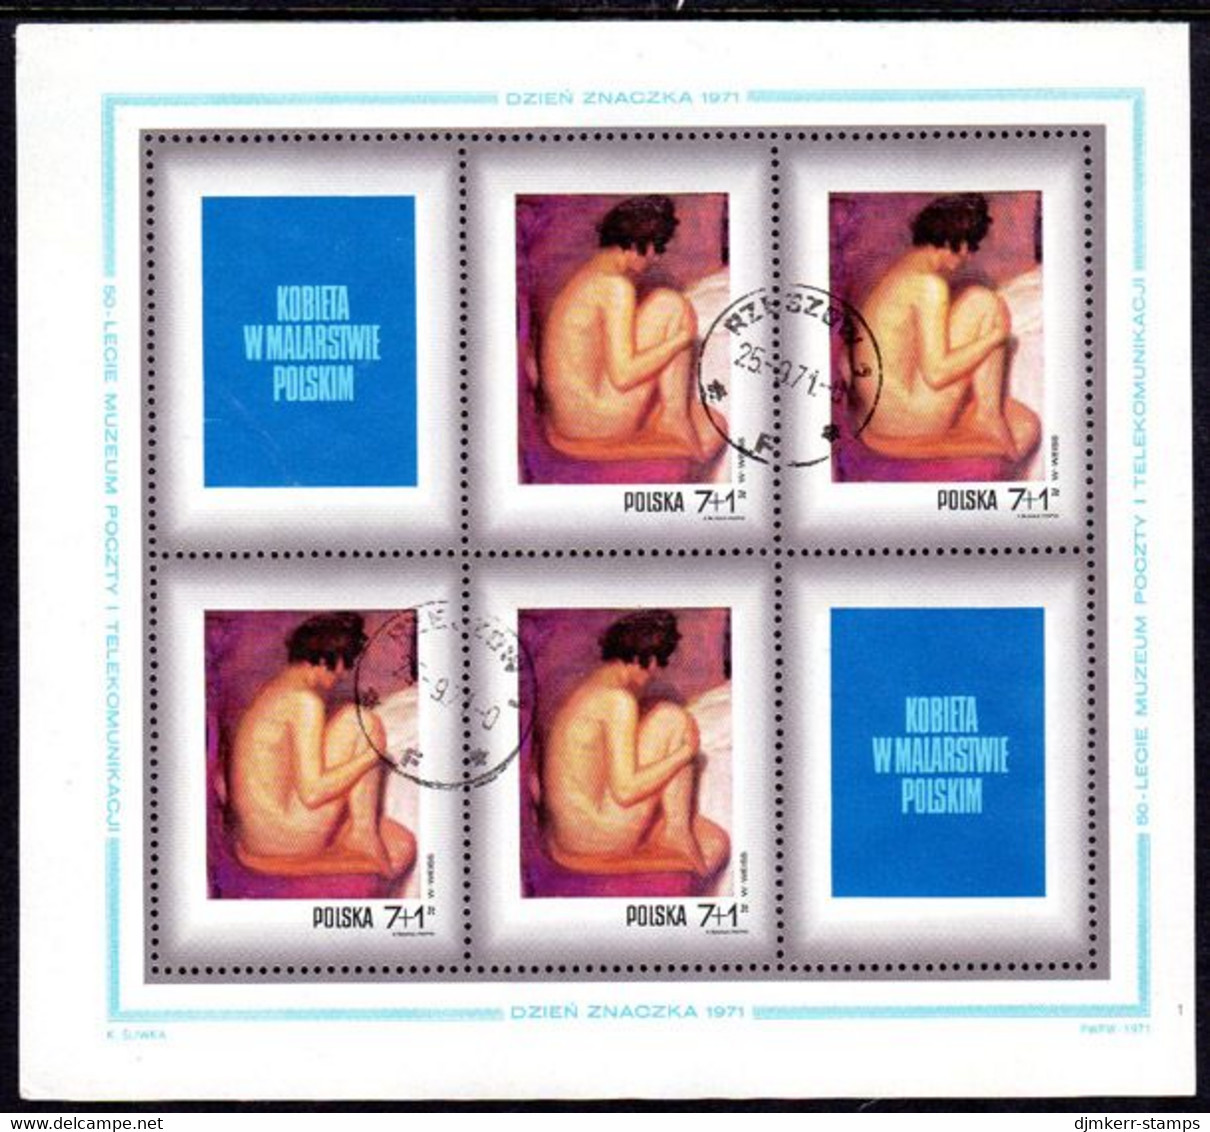 POLAND 1971 Stamp Day: Paintings of Women sheetlets  used . Michel 2110-17 Kb